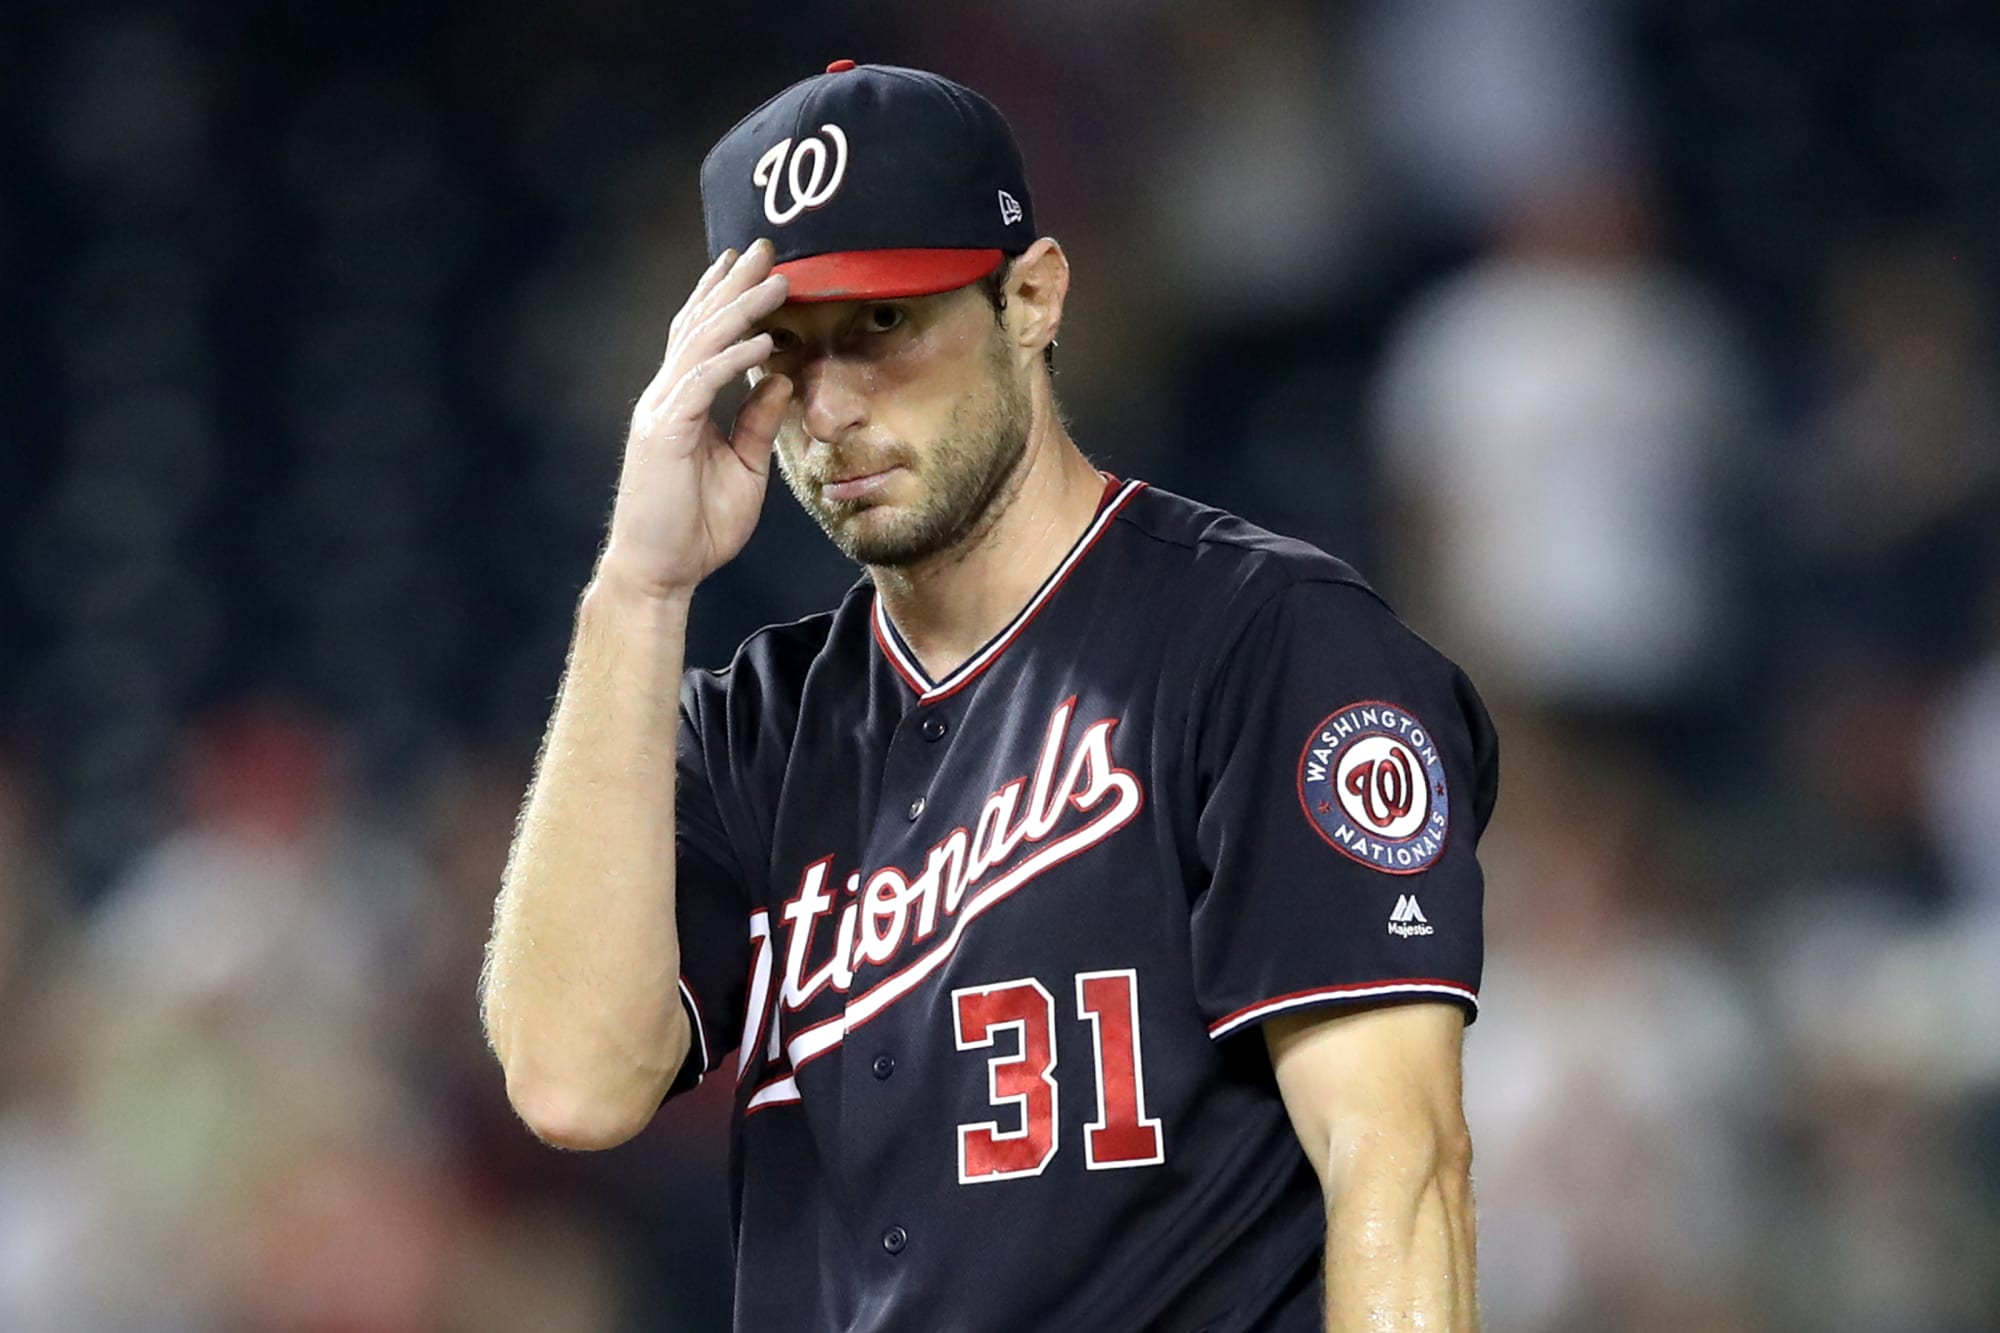 Washington Nationals Max Scherzer makes history with 300th strikeout